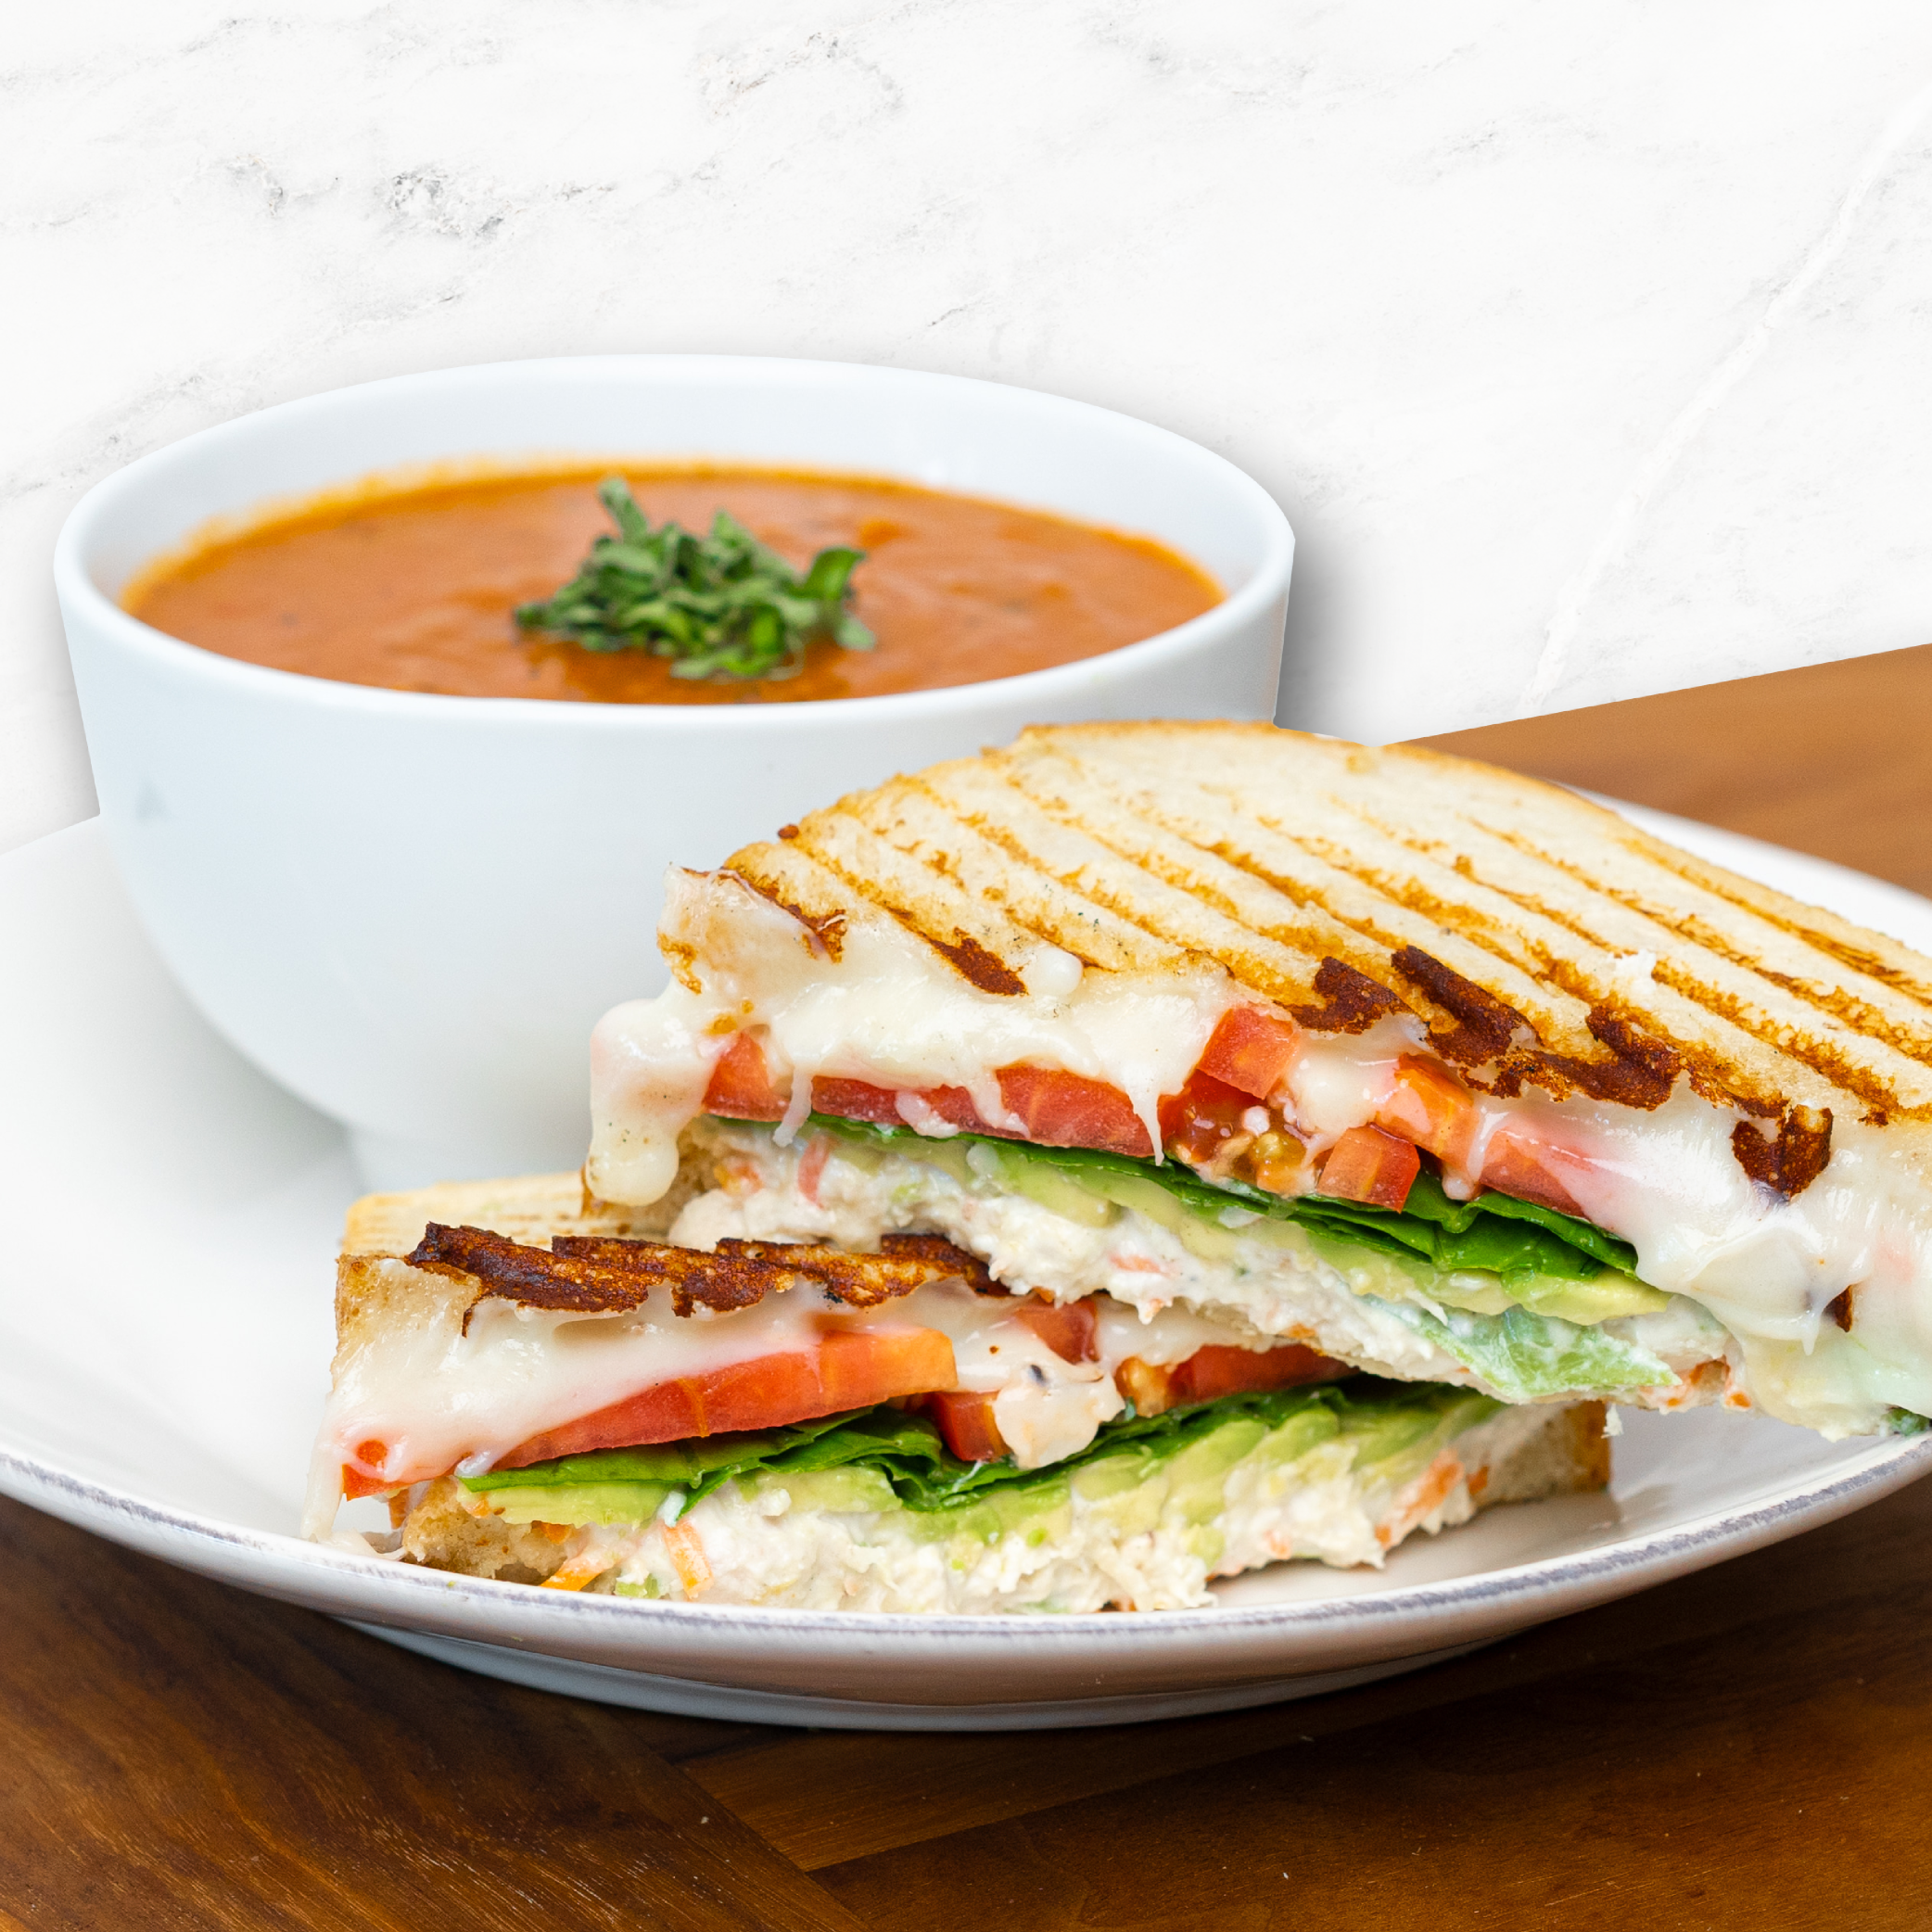 paninis-and-melts_Panini-Chicken-Salad-Avo-w-Tomato-Bisque_small-2